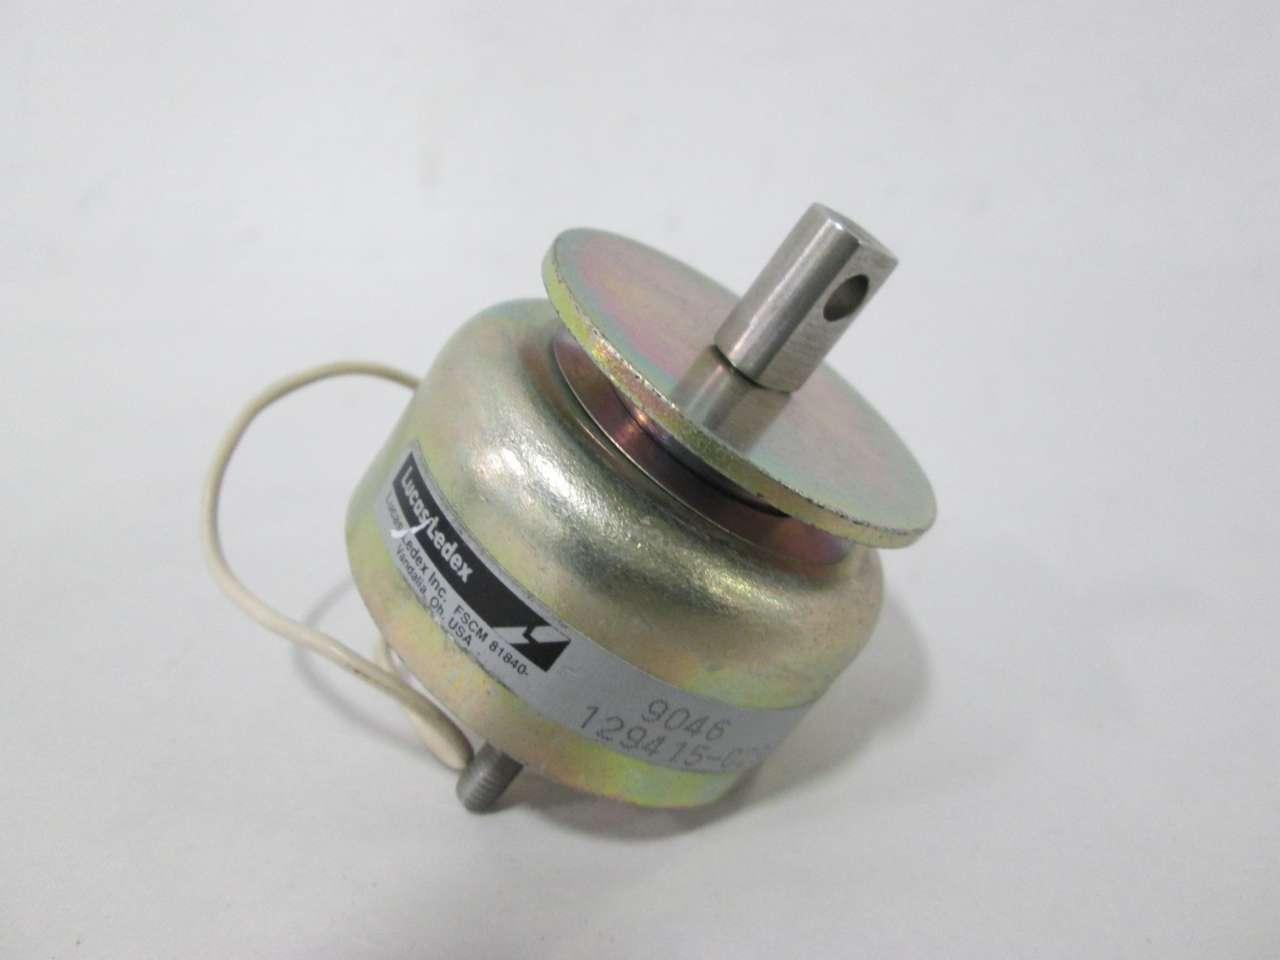 New Lucas Ledex  129415-029  9523  Rotary Electric Solenoid Made in USA 